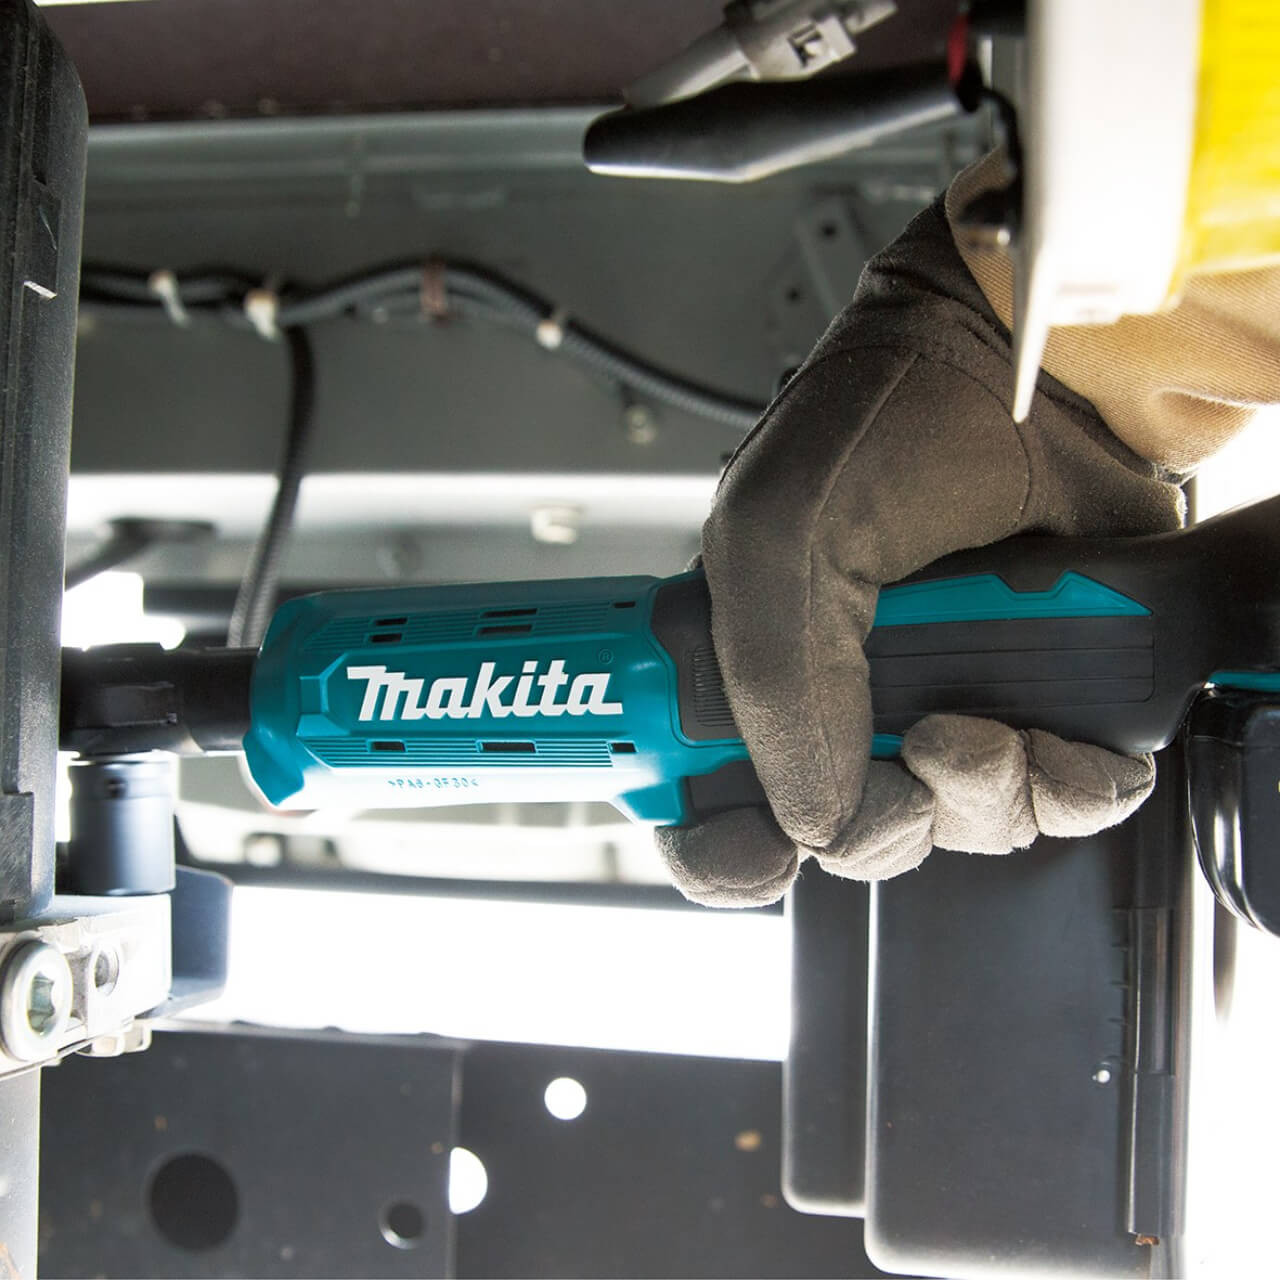 Makita 18V Ratchet Wrench 1/4” & 3/8” - Tool Only